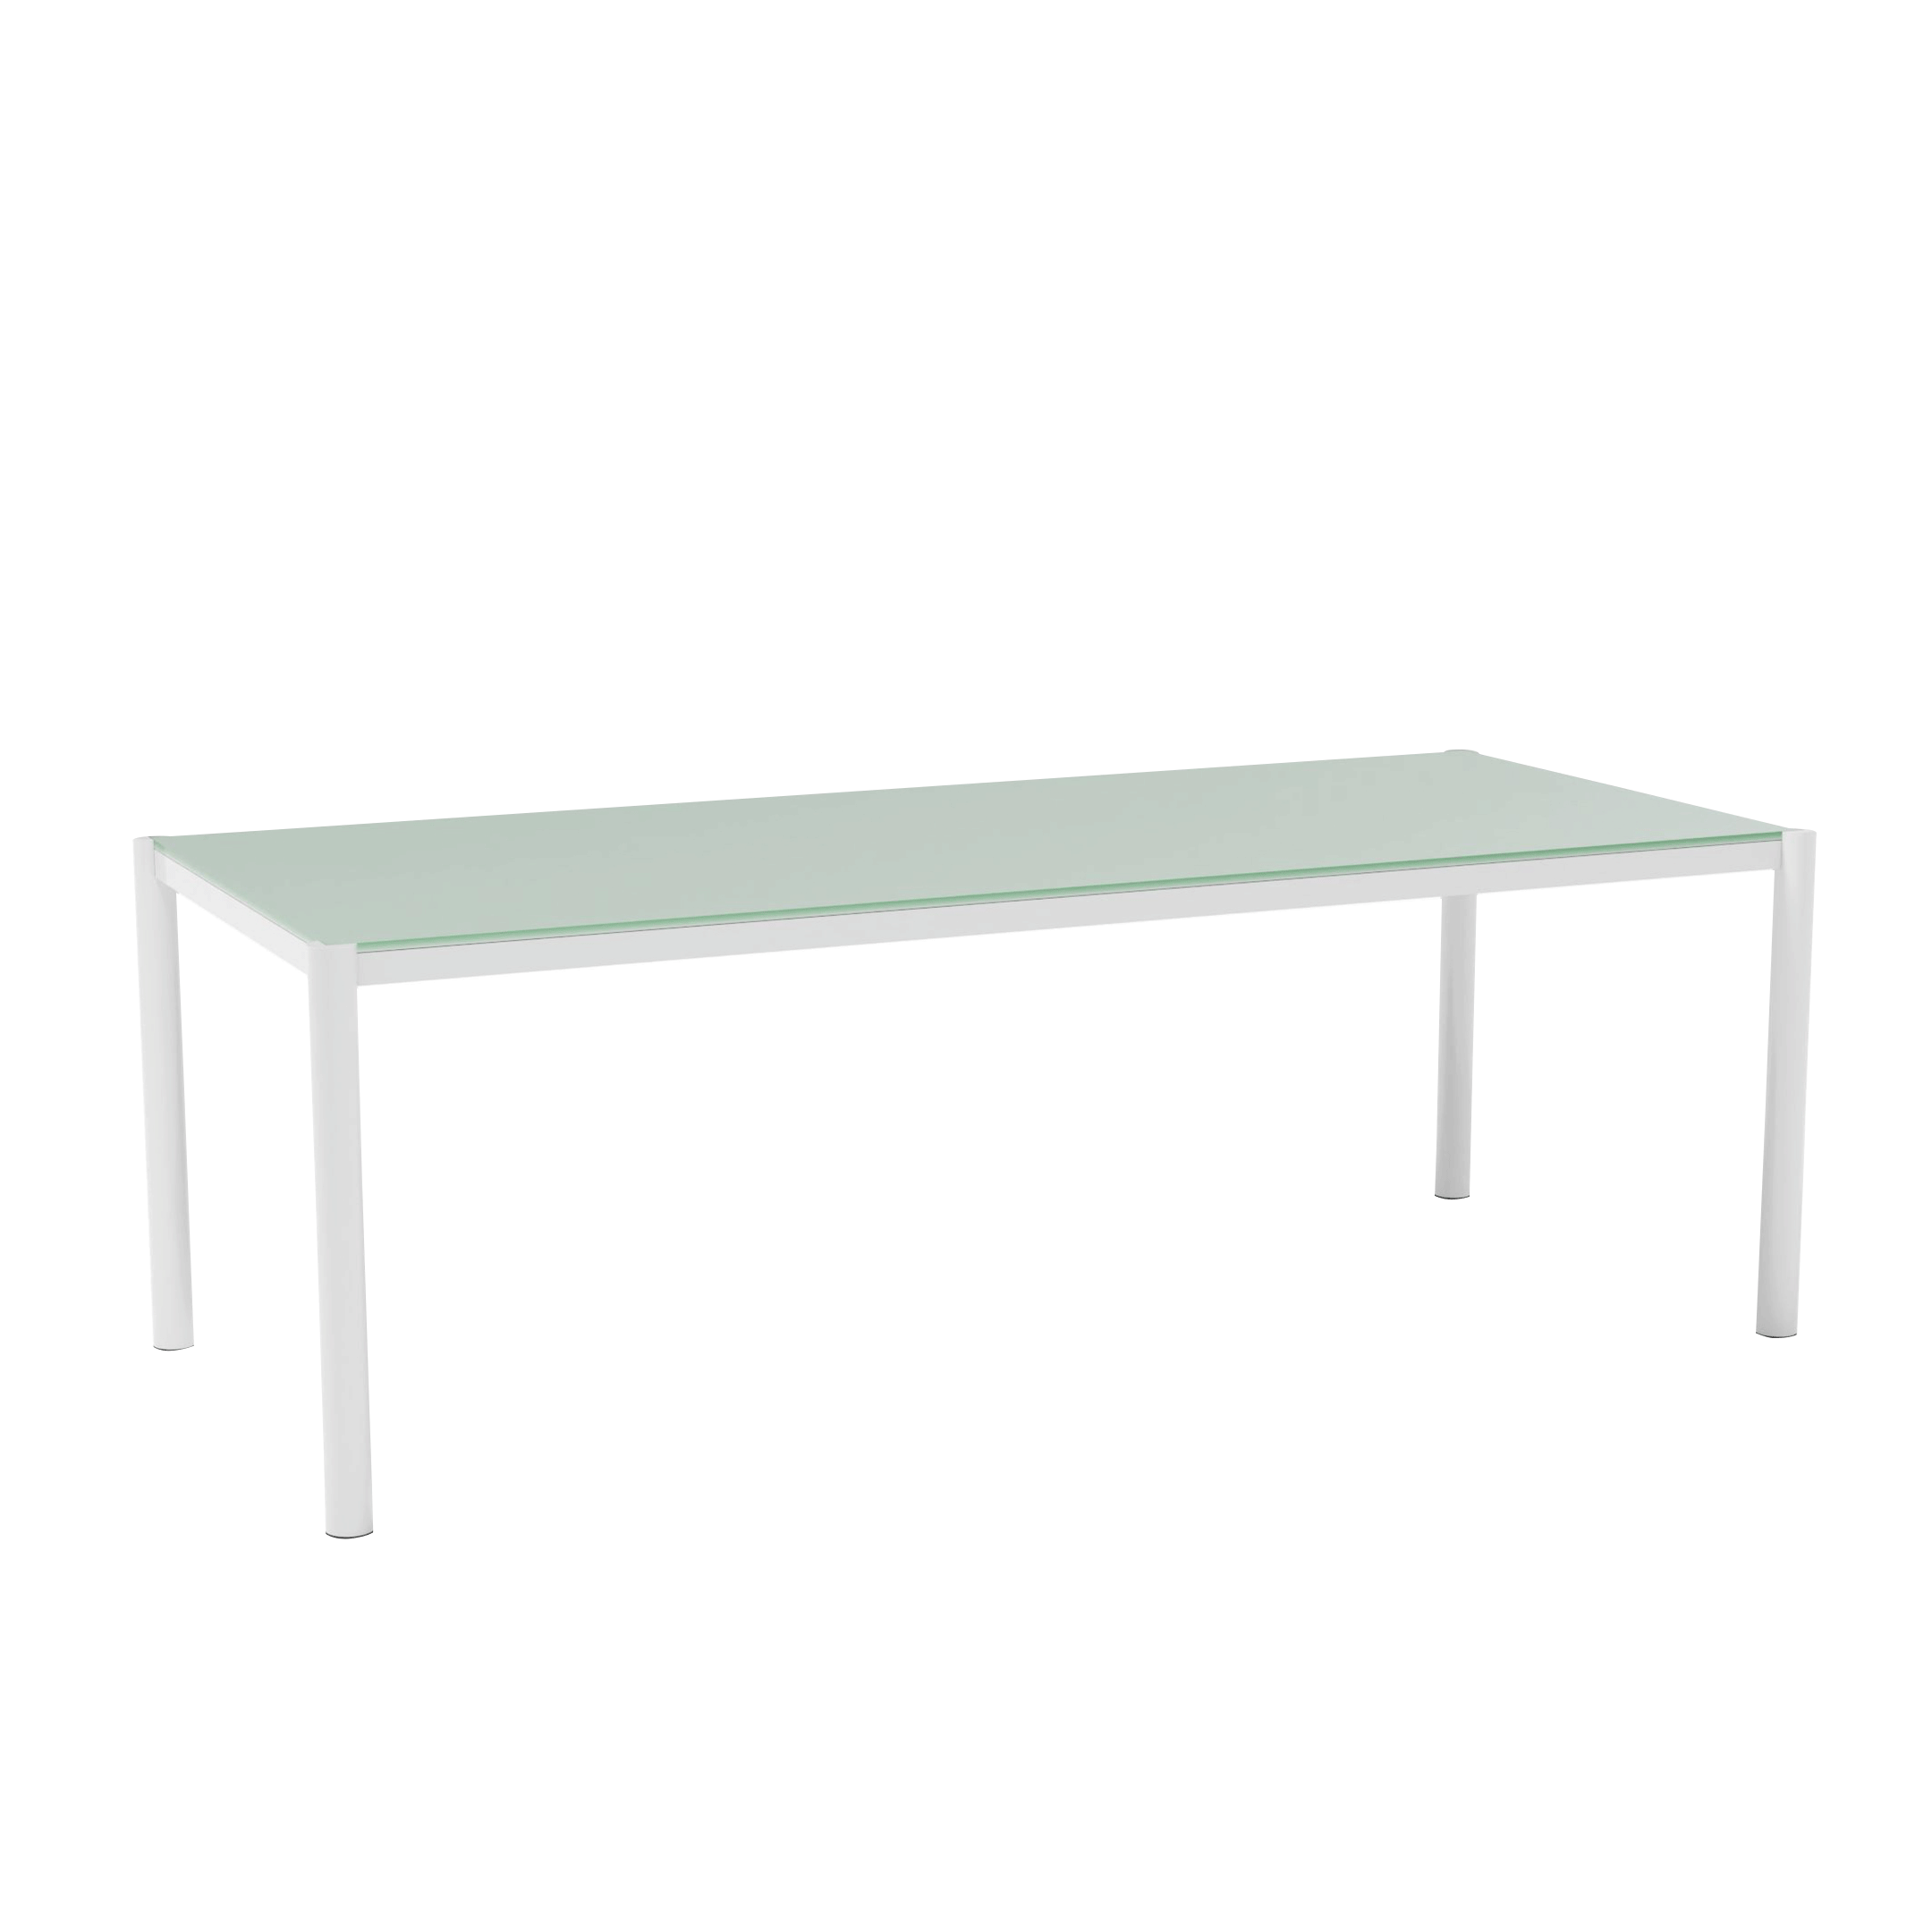 Get-Together Dining Table 84"